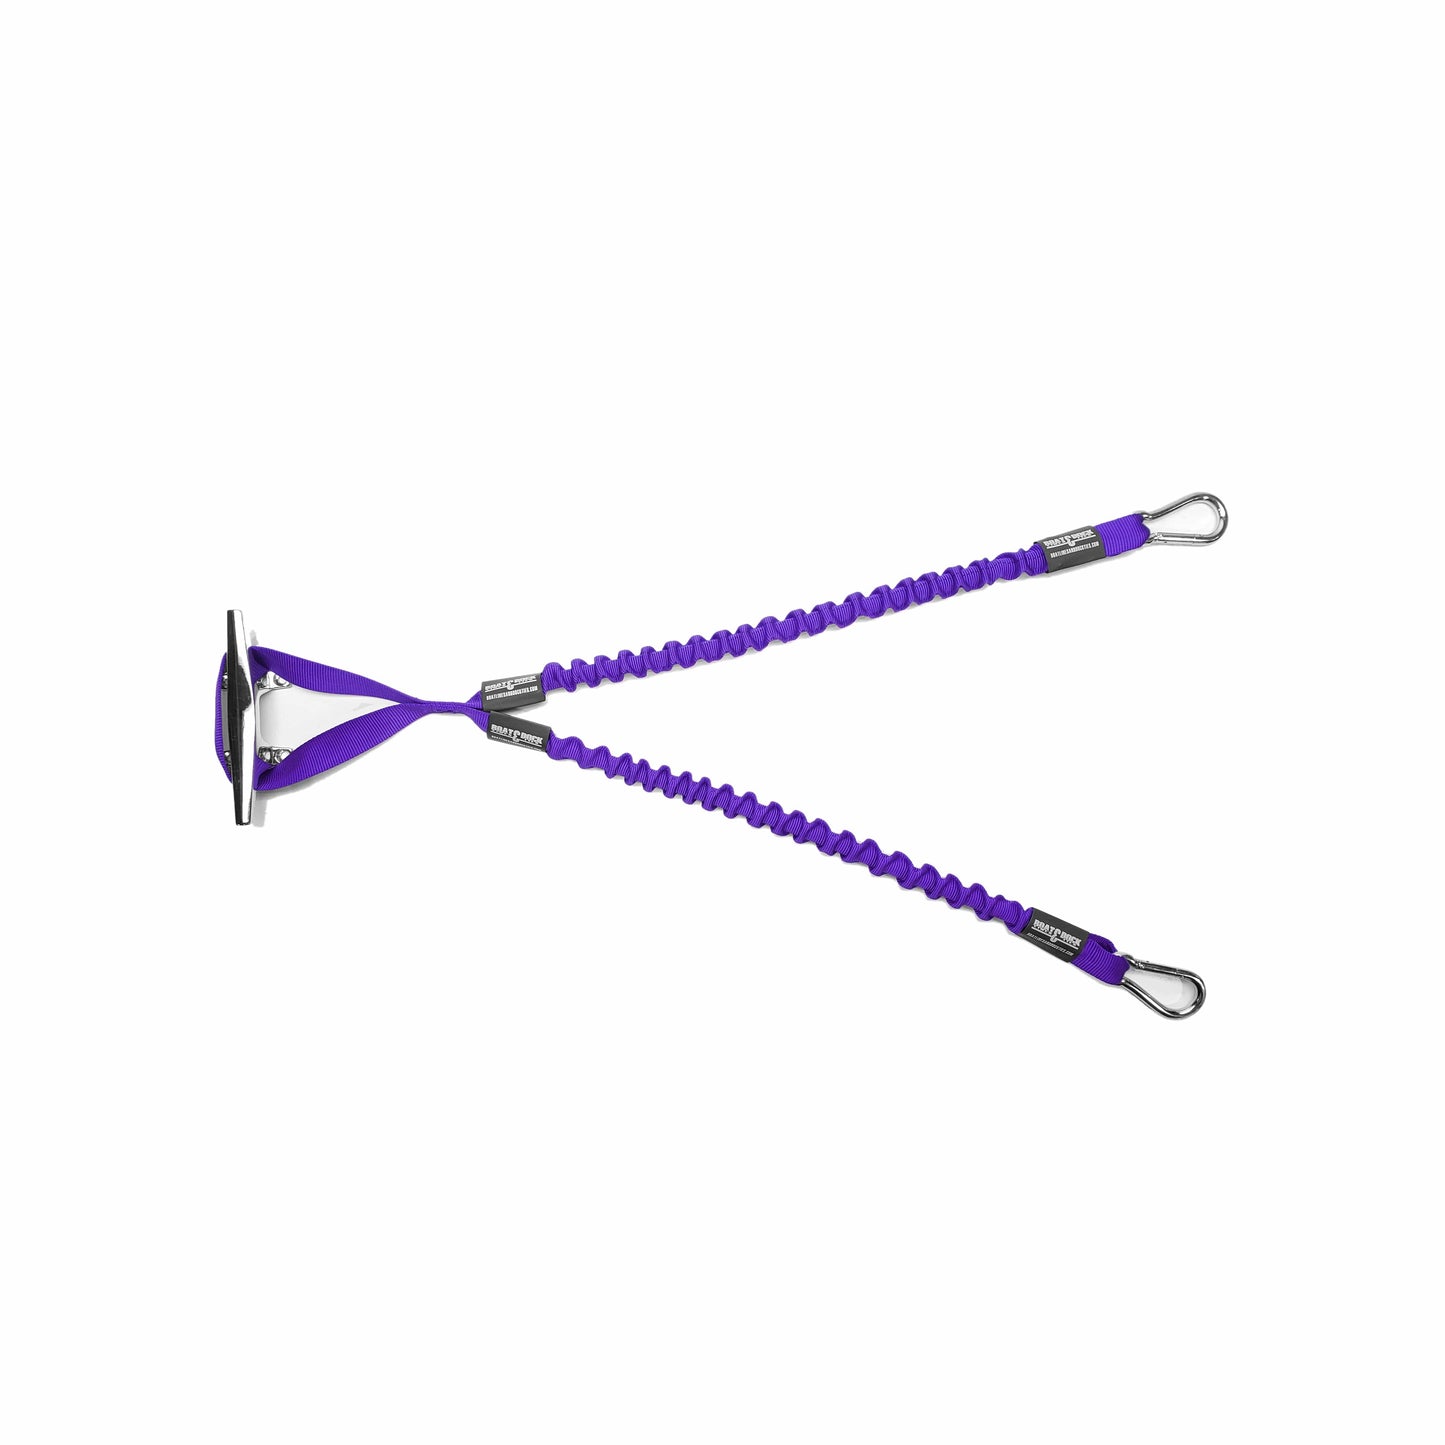 Wake Defender -3 Point Dock Attachment System - 1 Loop End with 2 Hook Ends - Boat Lines & Dock Ties Boat Lines & Dock Ties 24 Inch leg / Purple